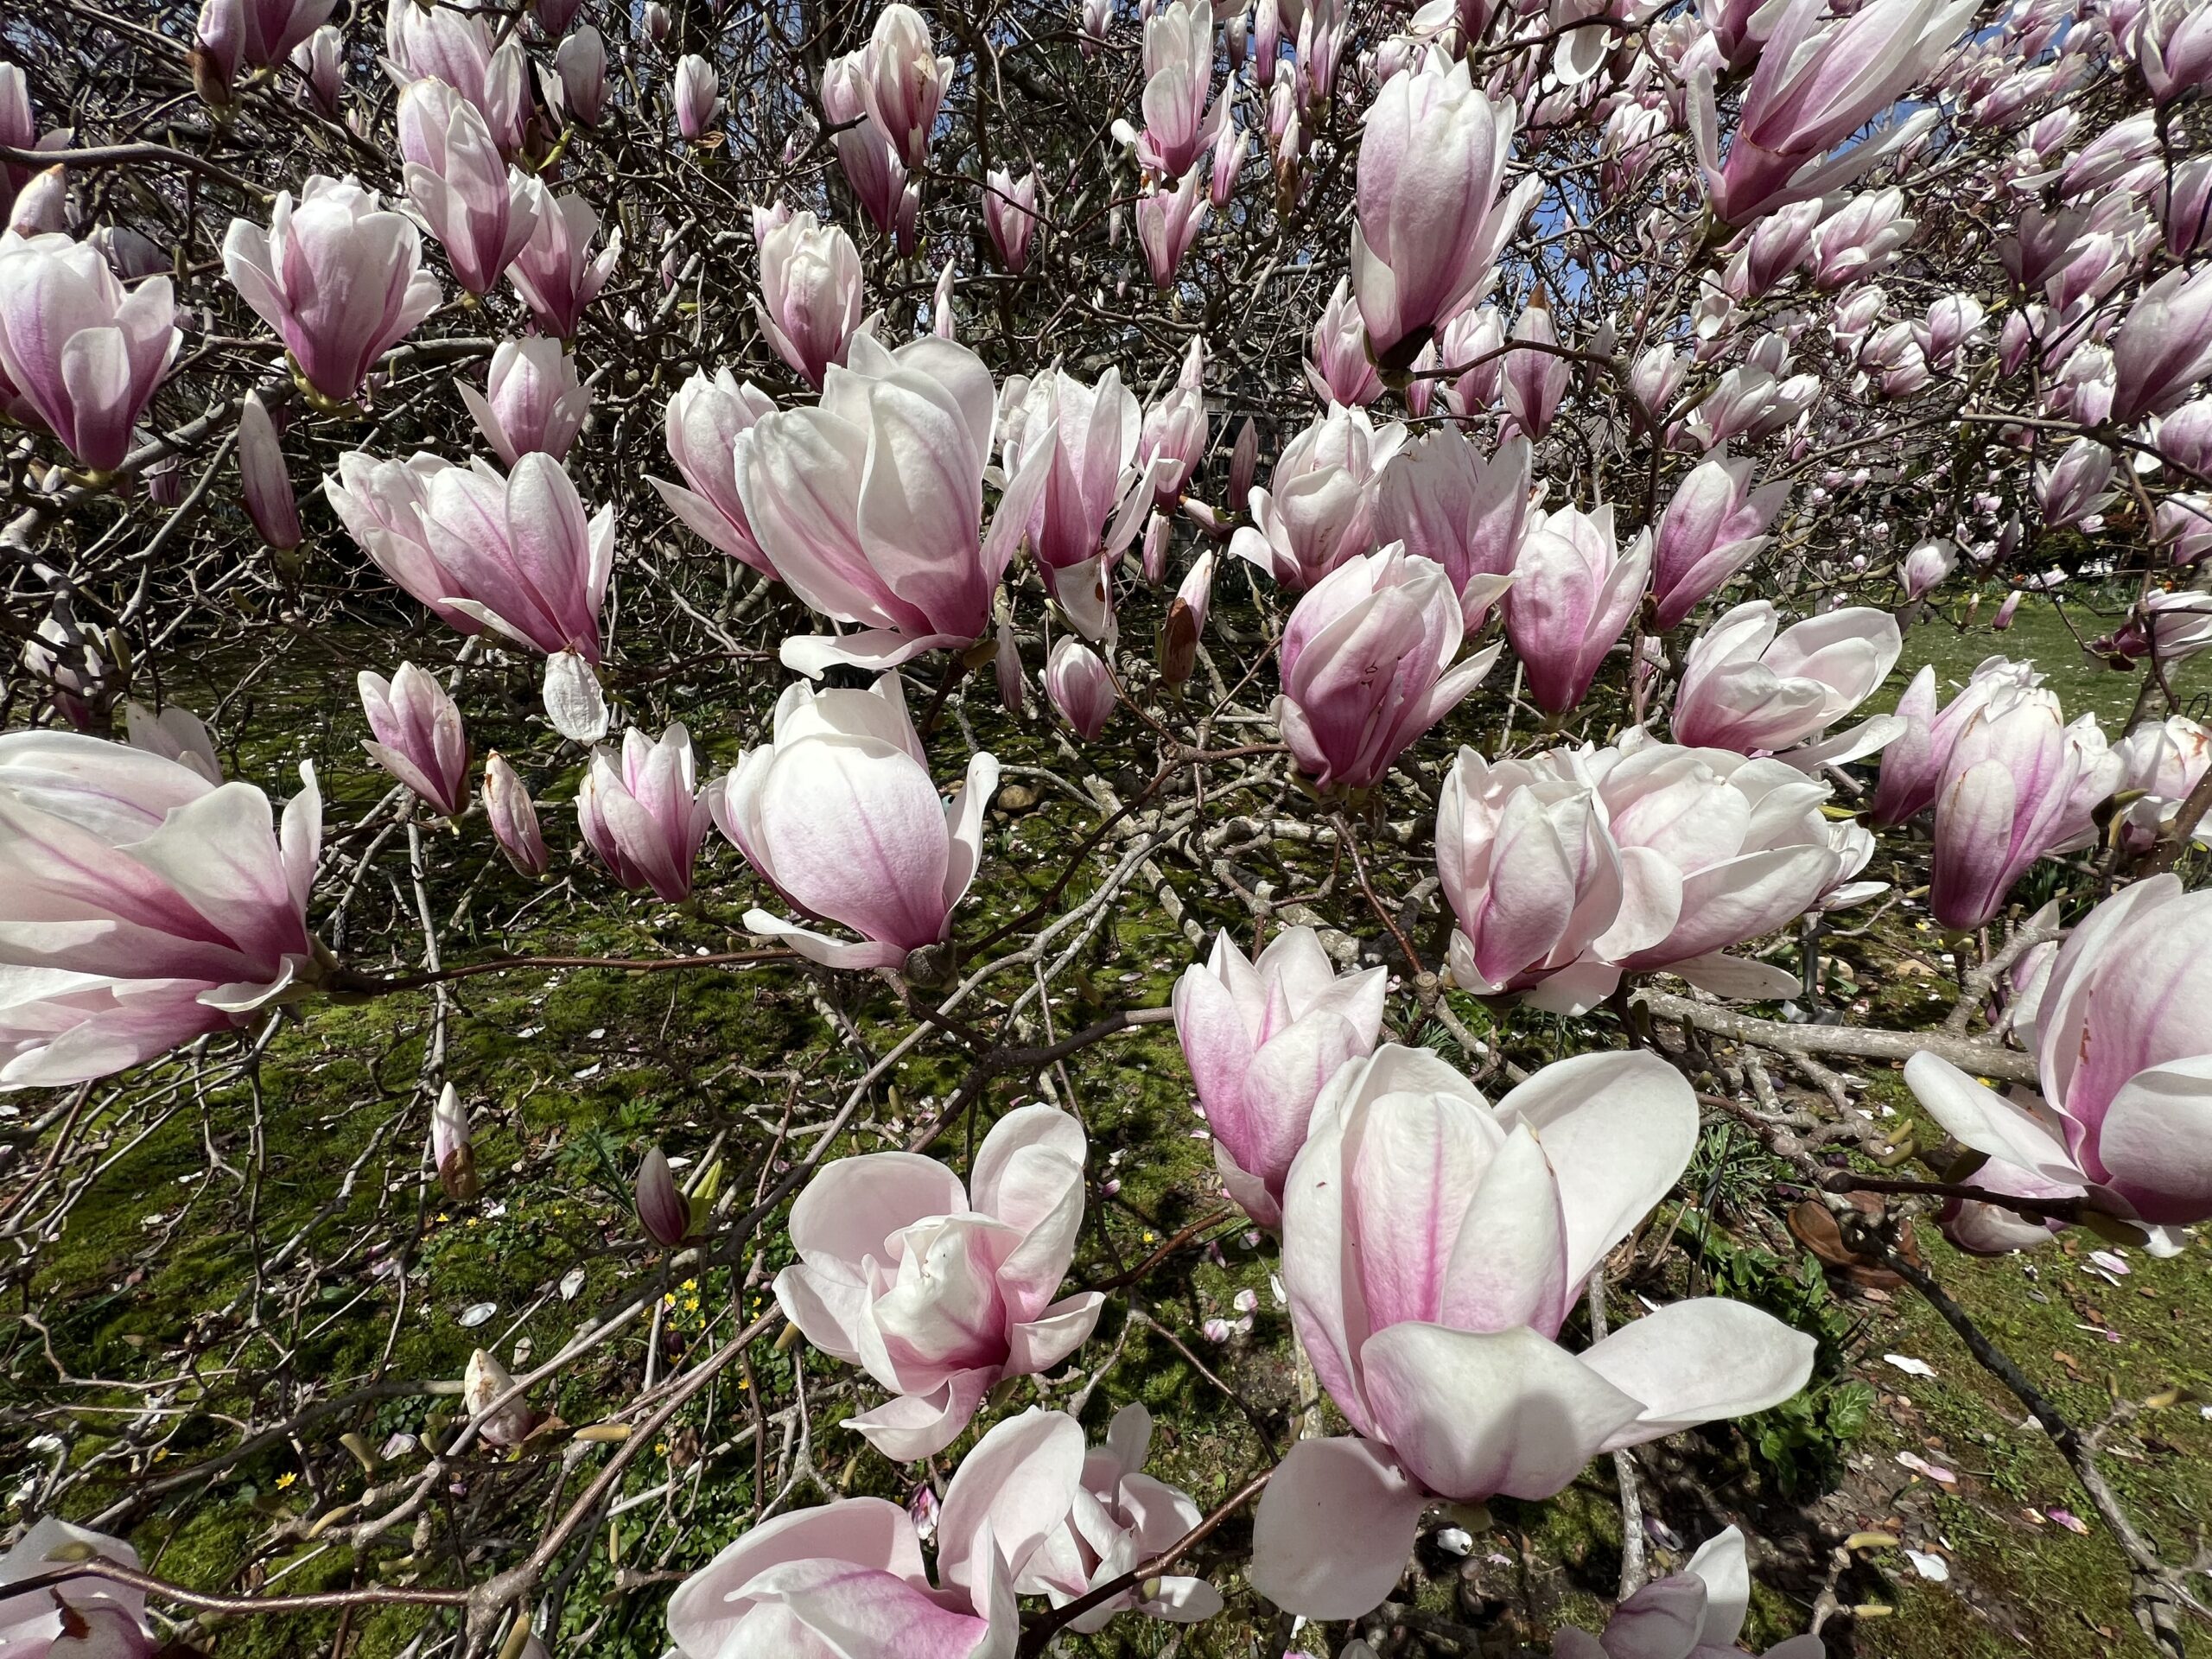 This near-century-old classic pink magnolia regularly stops traffic outside Dianne Benson's garden in East Hampton. DANA SHAW